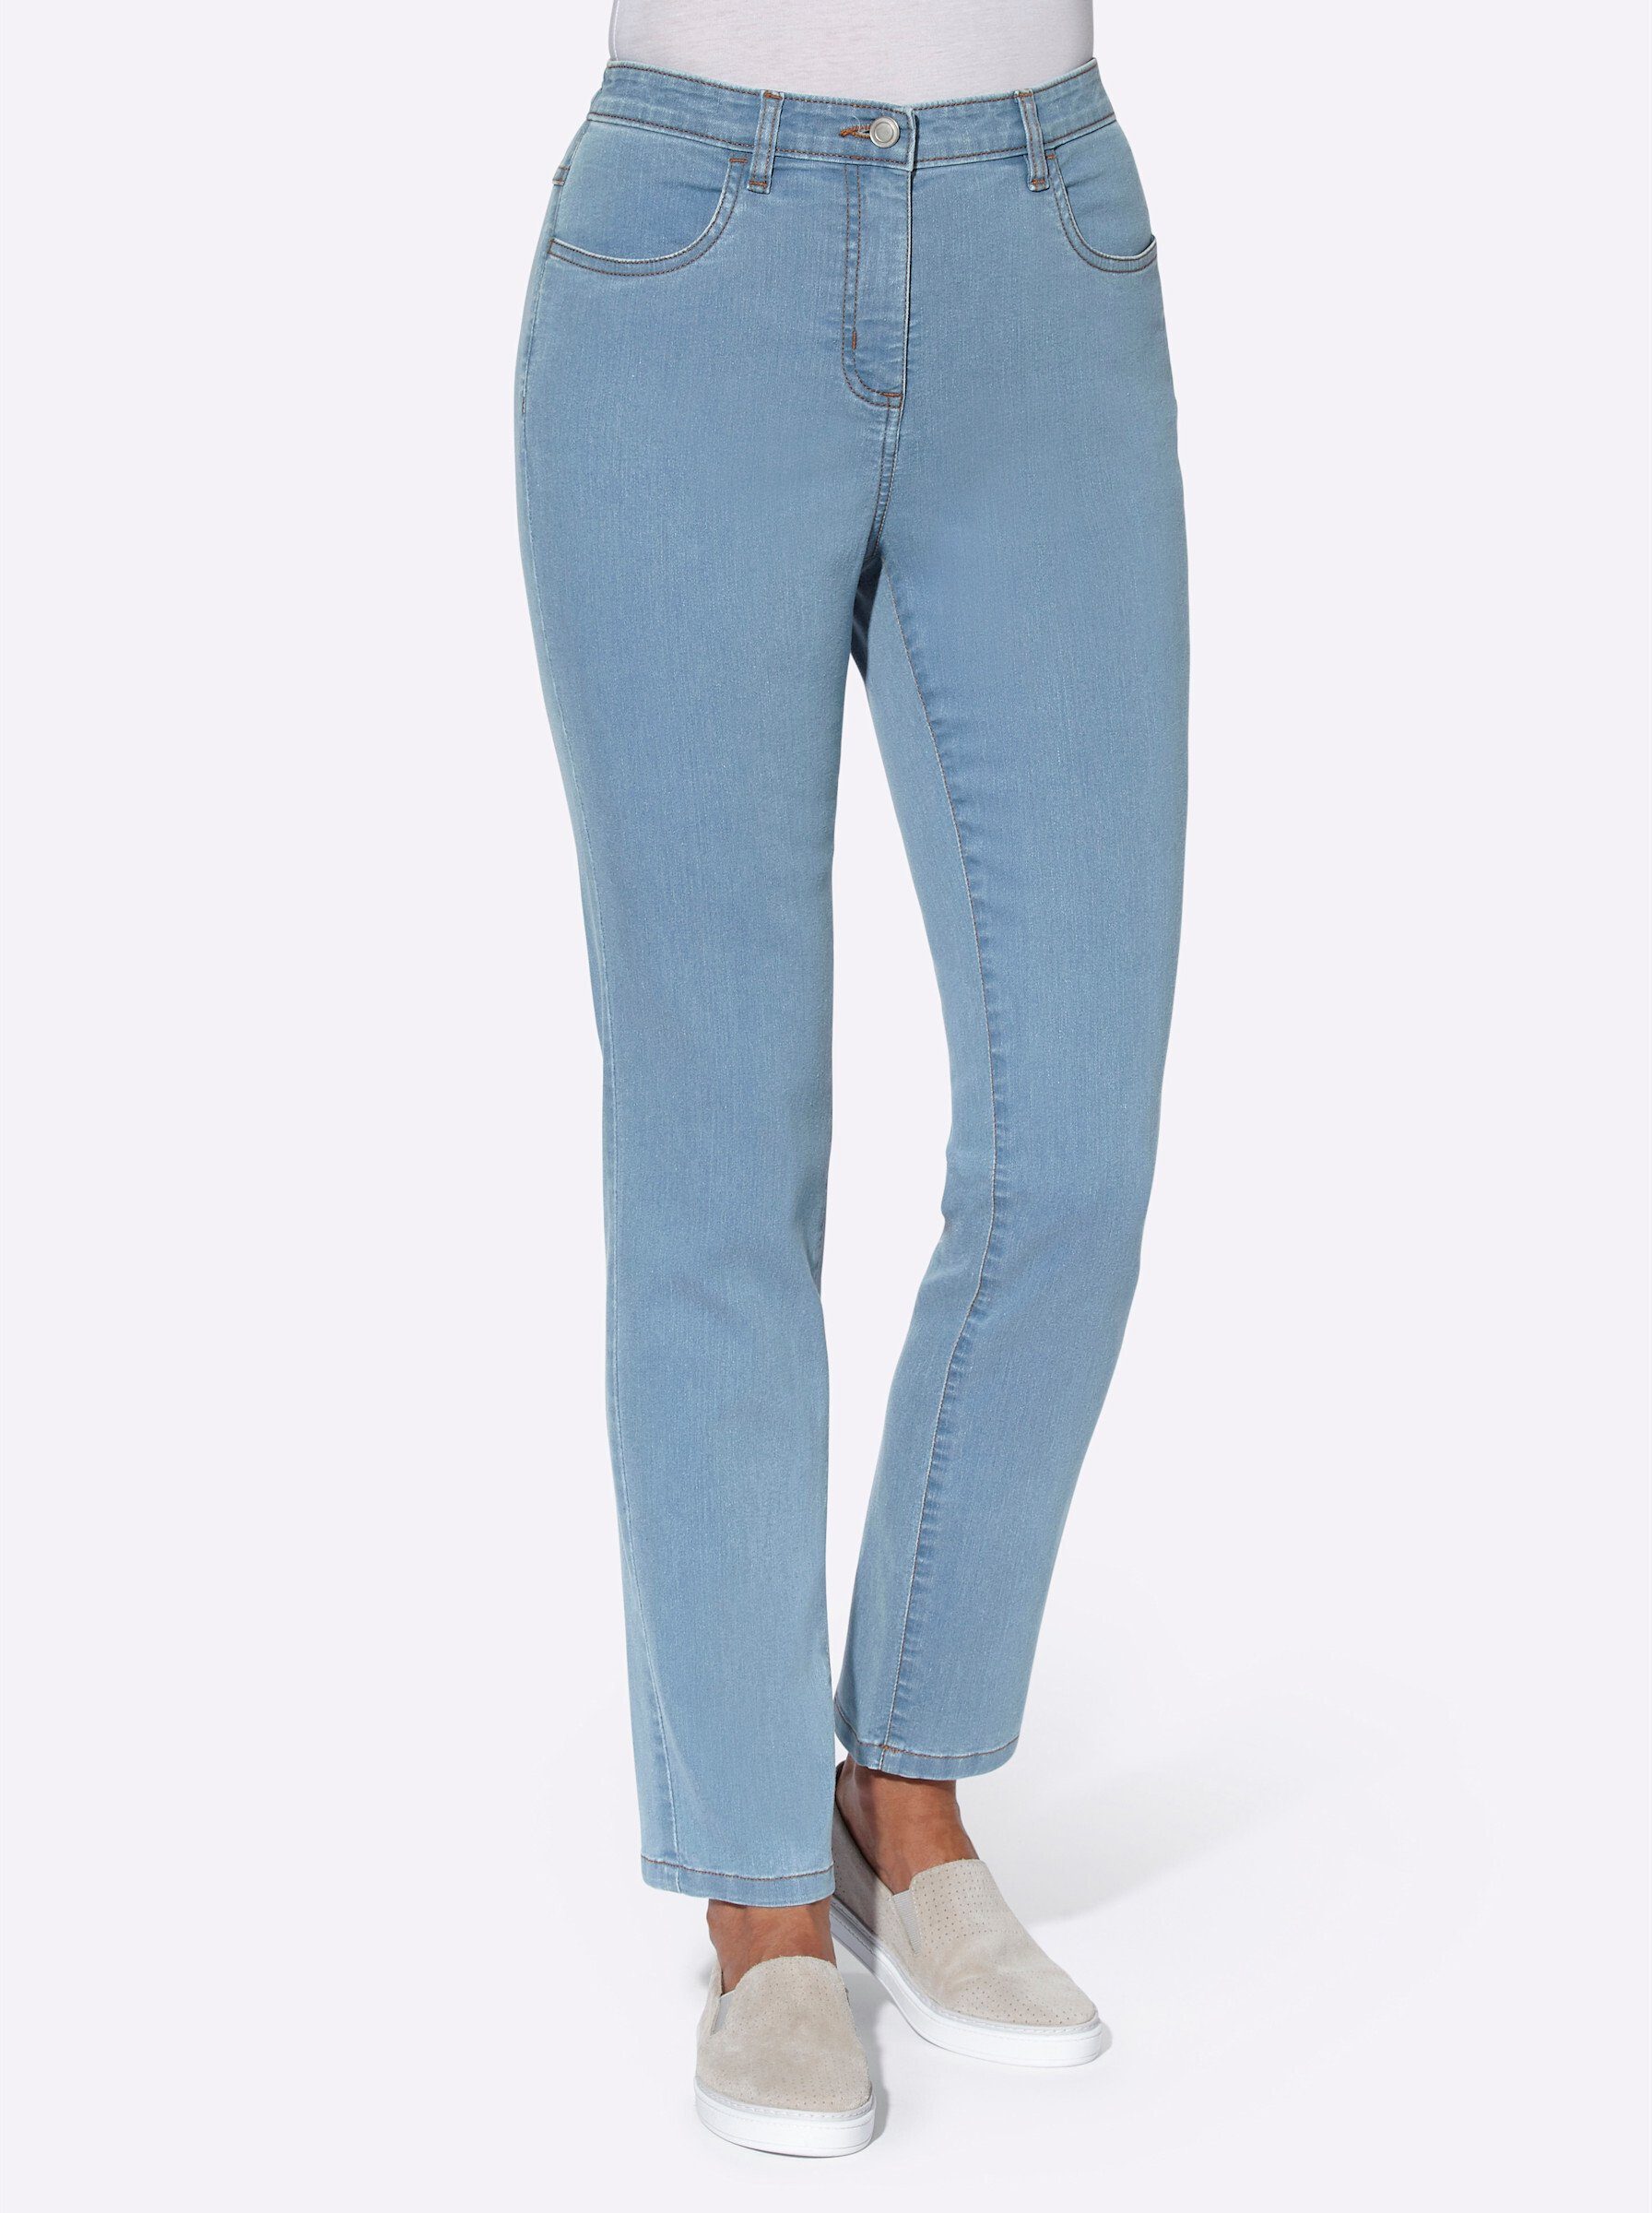 Sieh an! Bequeme Jeans blue-bleached | Slim-Fit Jeans